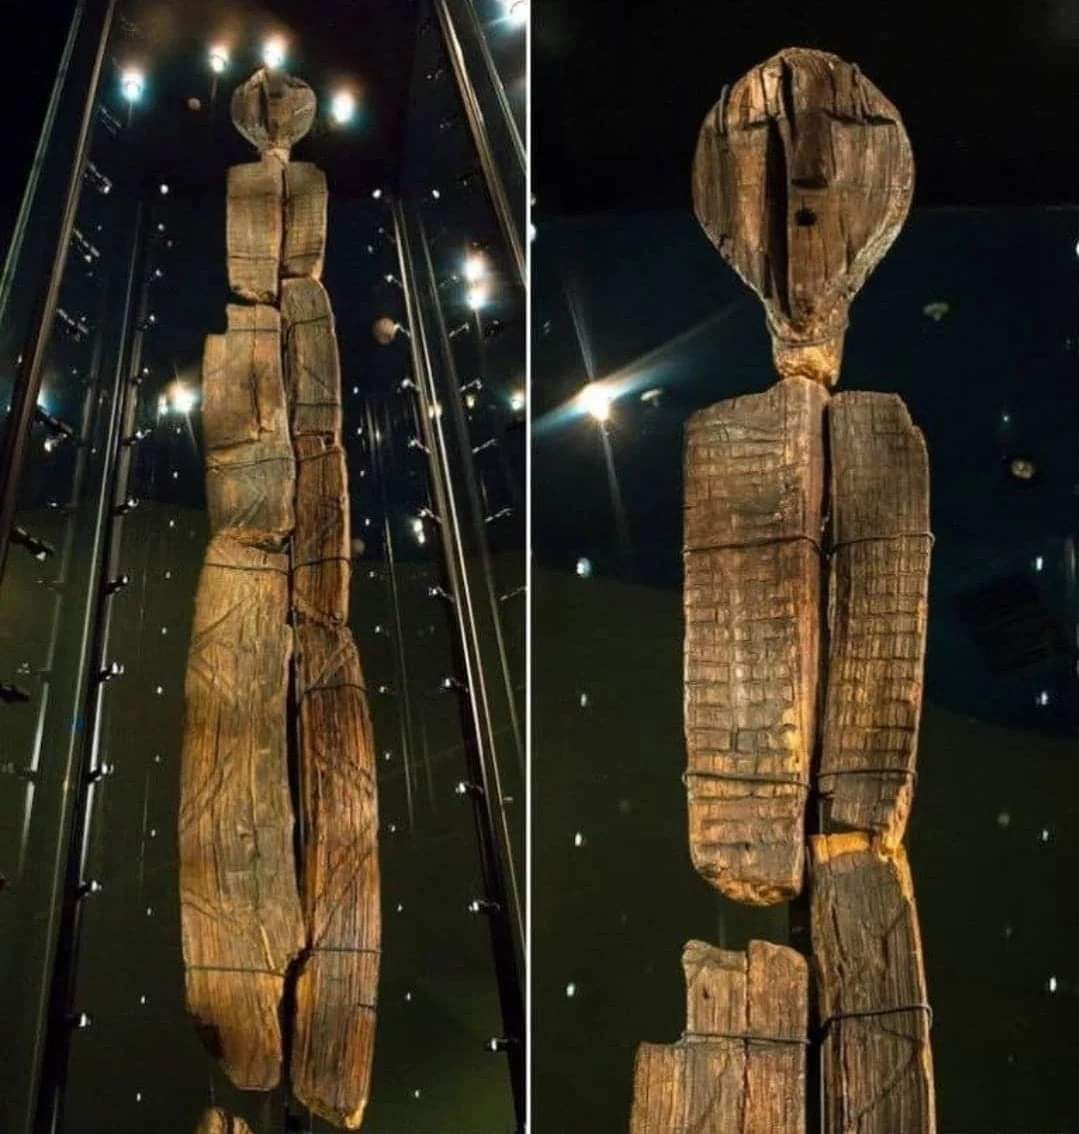 The Shigir Idol is the oldest known wooden sculpture in the world, made during the Mesolithic period, shortly after the end of the last Ice Age. The wood it was carved from is approximately 12,000 years old. The sculpture was discovered on January 24, 1890 at a depth of 4 m (13